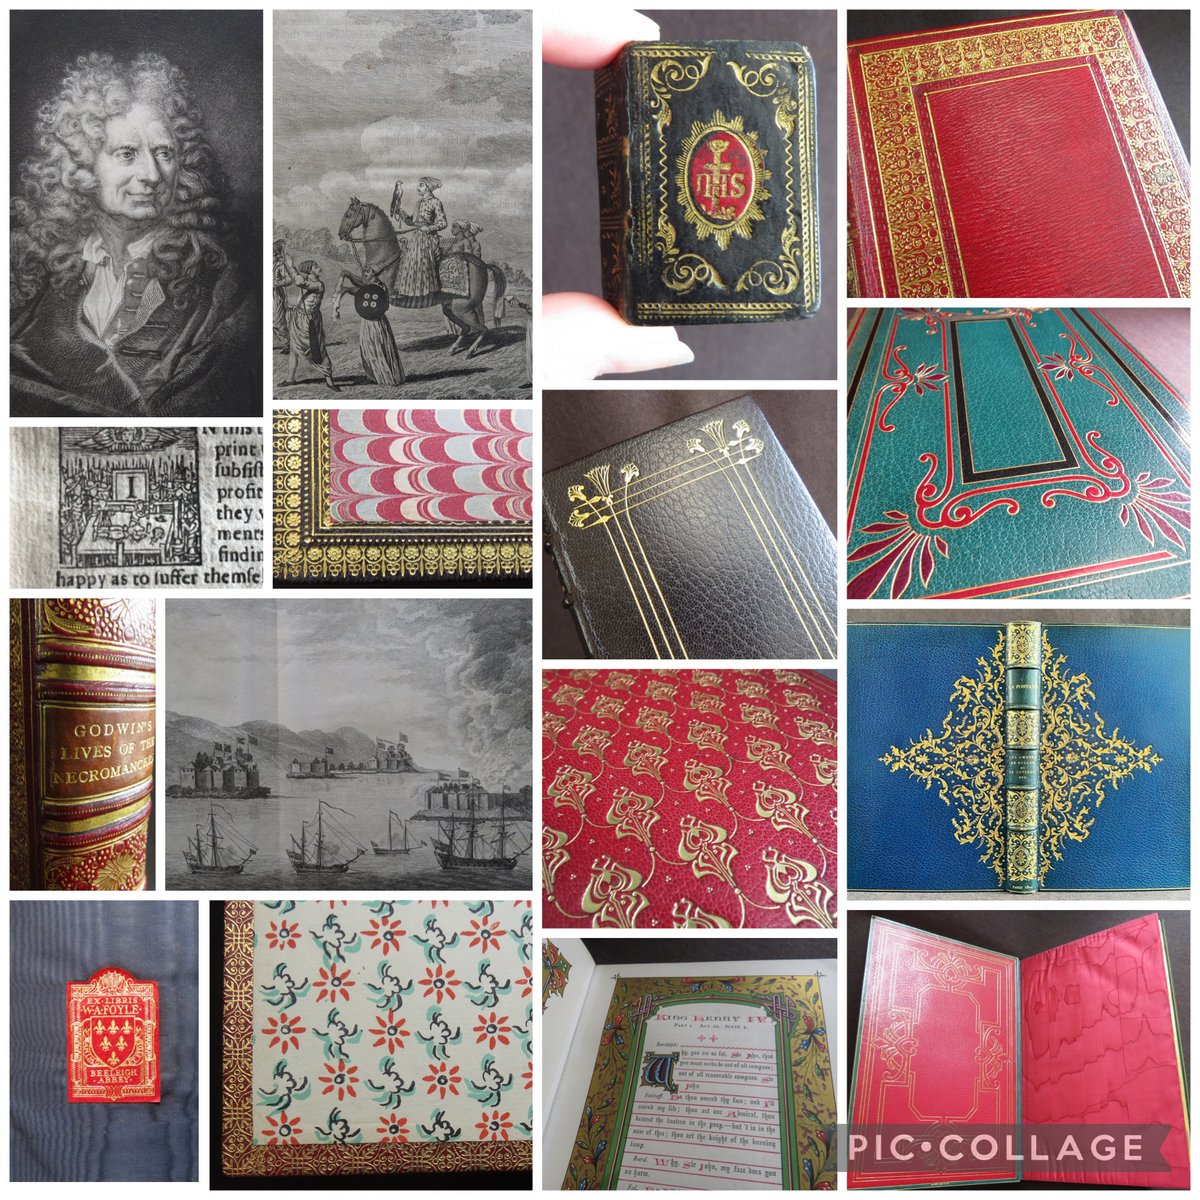 New, antiquarian & collectable book auctions, starting tonight for 10 day auction.

#antiquarian #bibliophile #history #BookTwitter #rarebooks #finebinding #bookhistory #earlymodern #bookauctions
ebay.co.uk/str/wisdompedl…